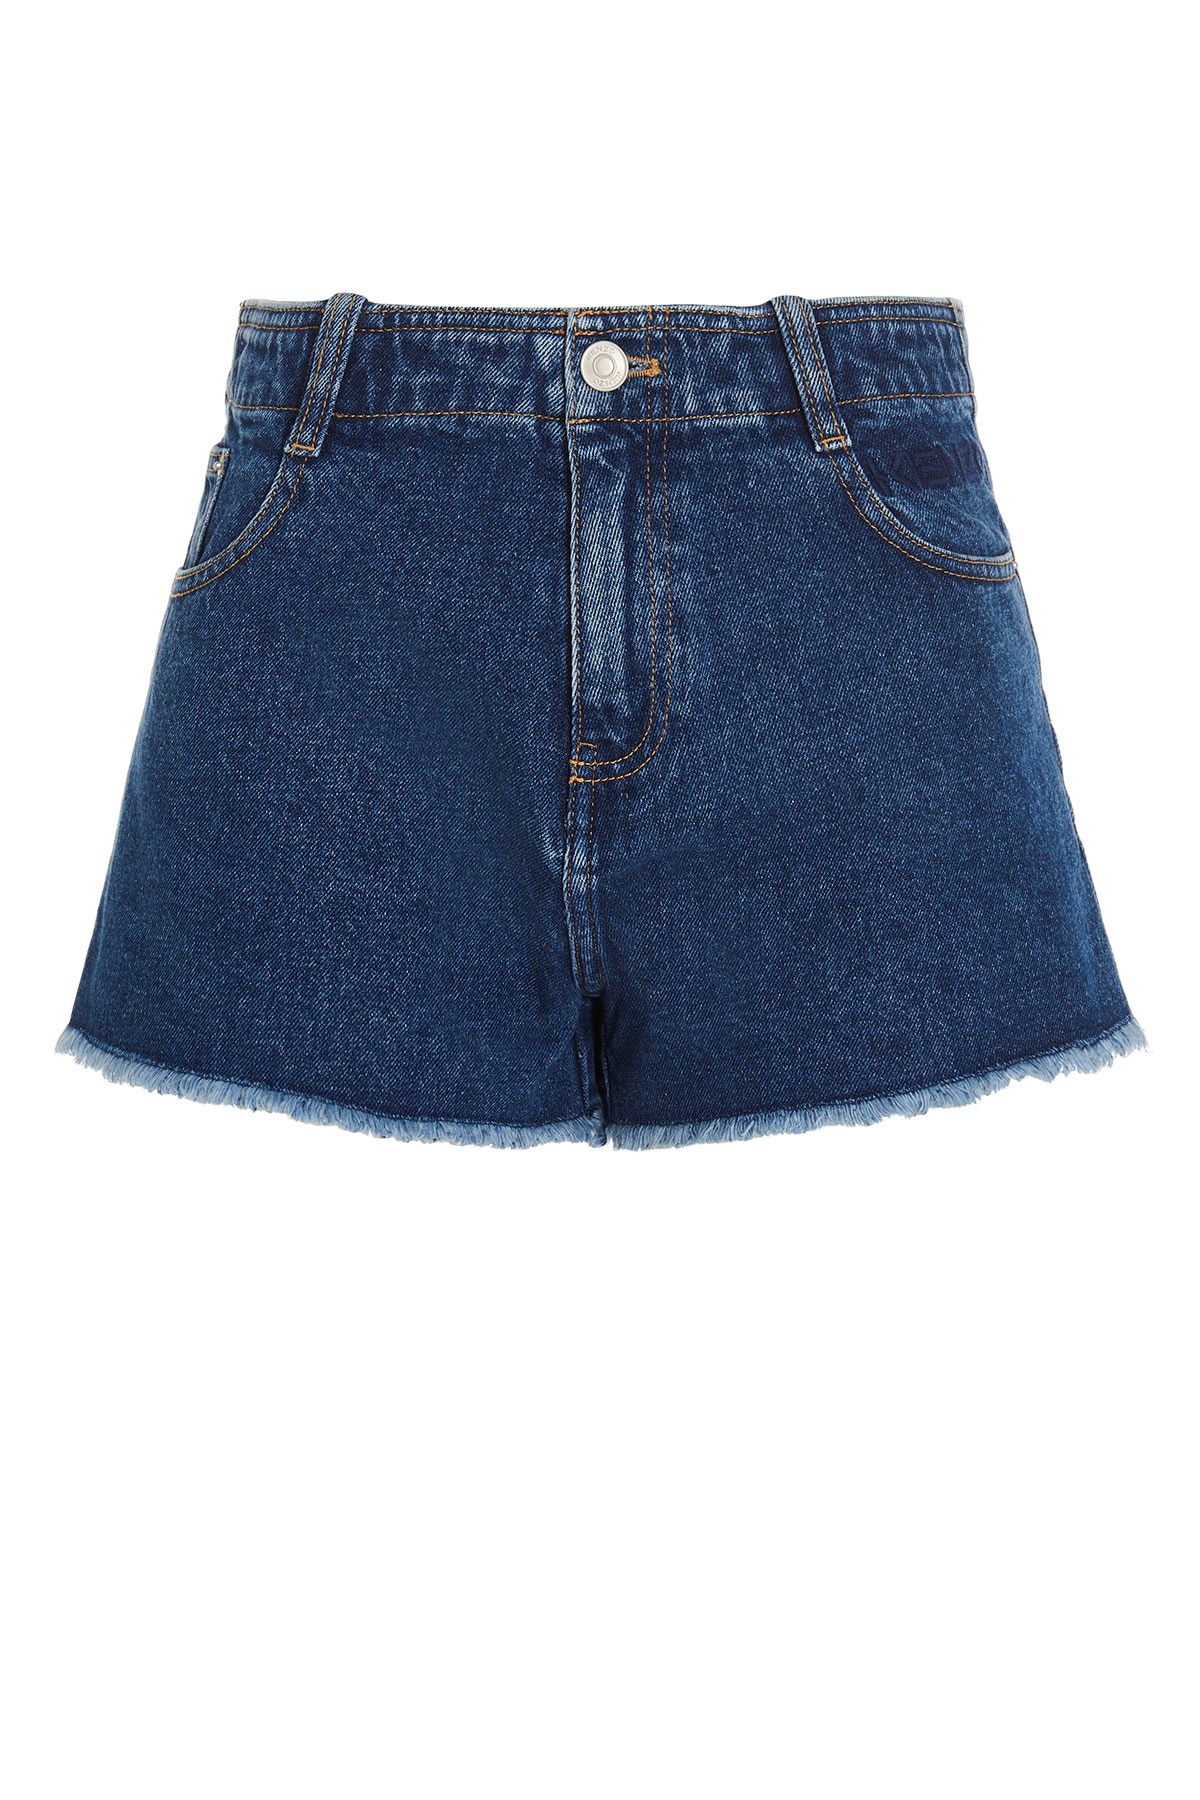 KENZO Jeanss Shorts